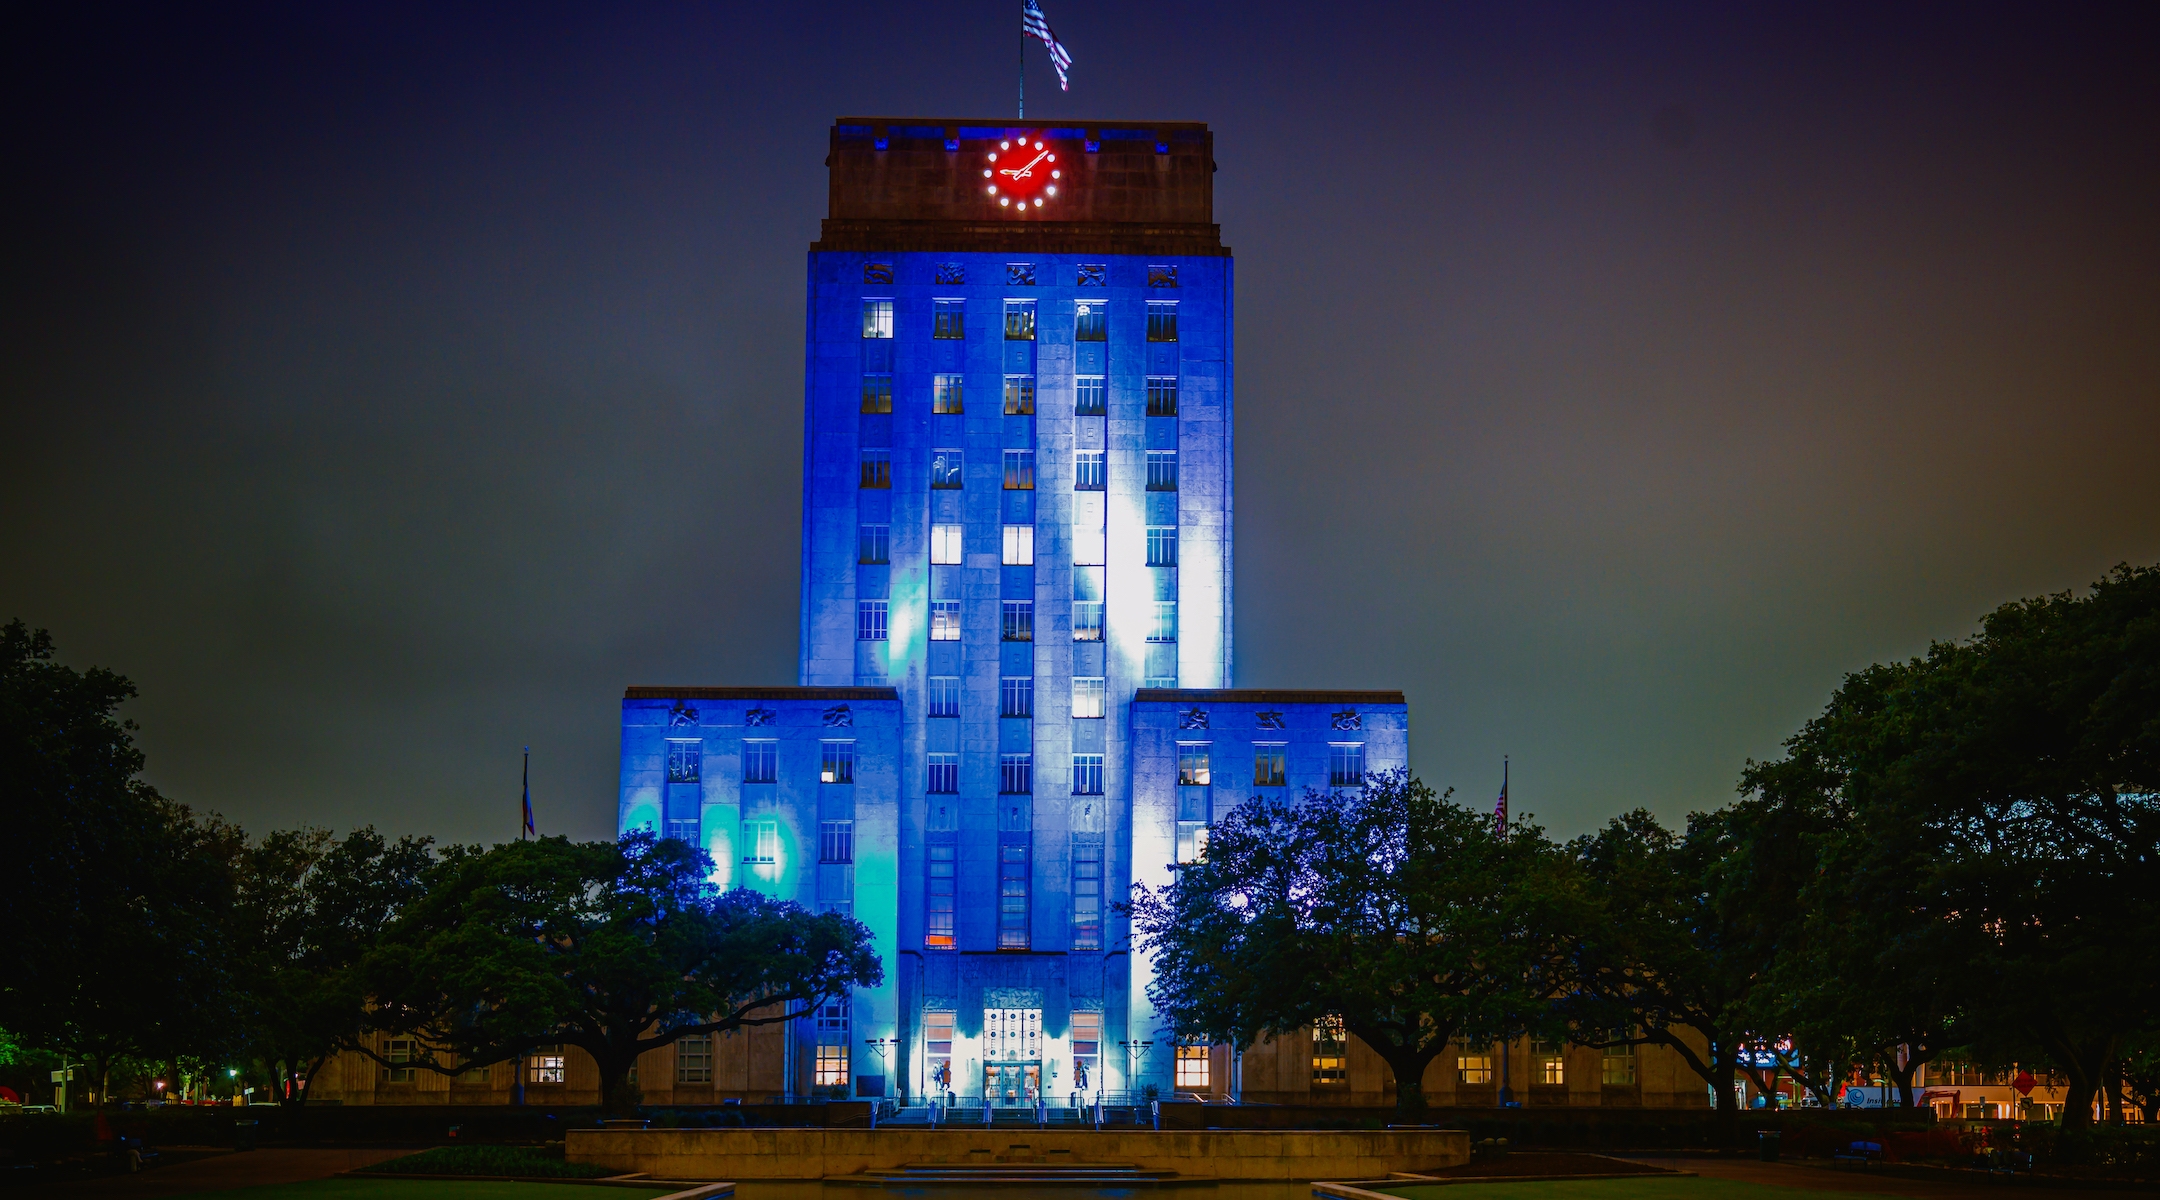 A City Hall lit up in blue and white